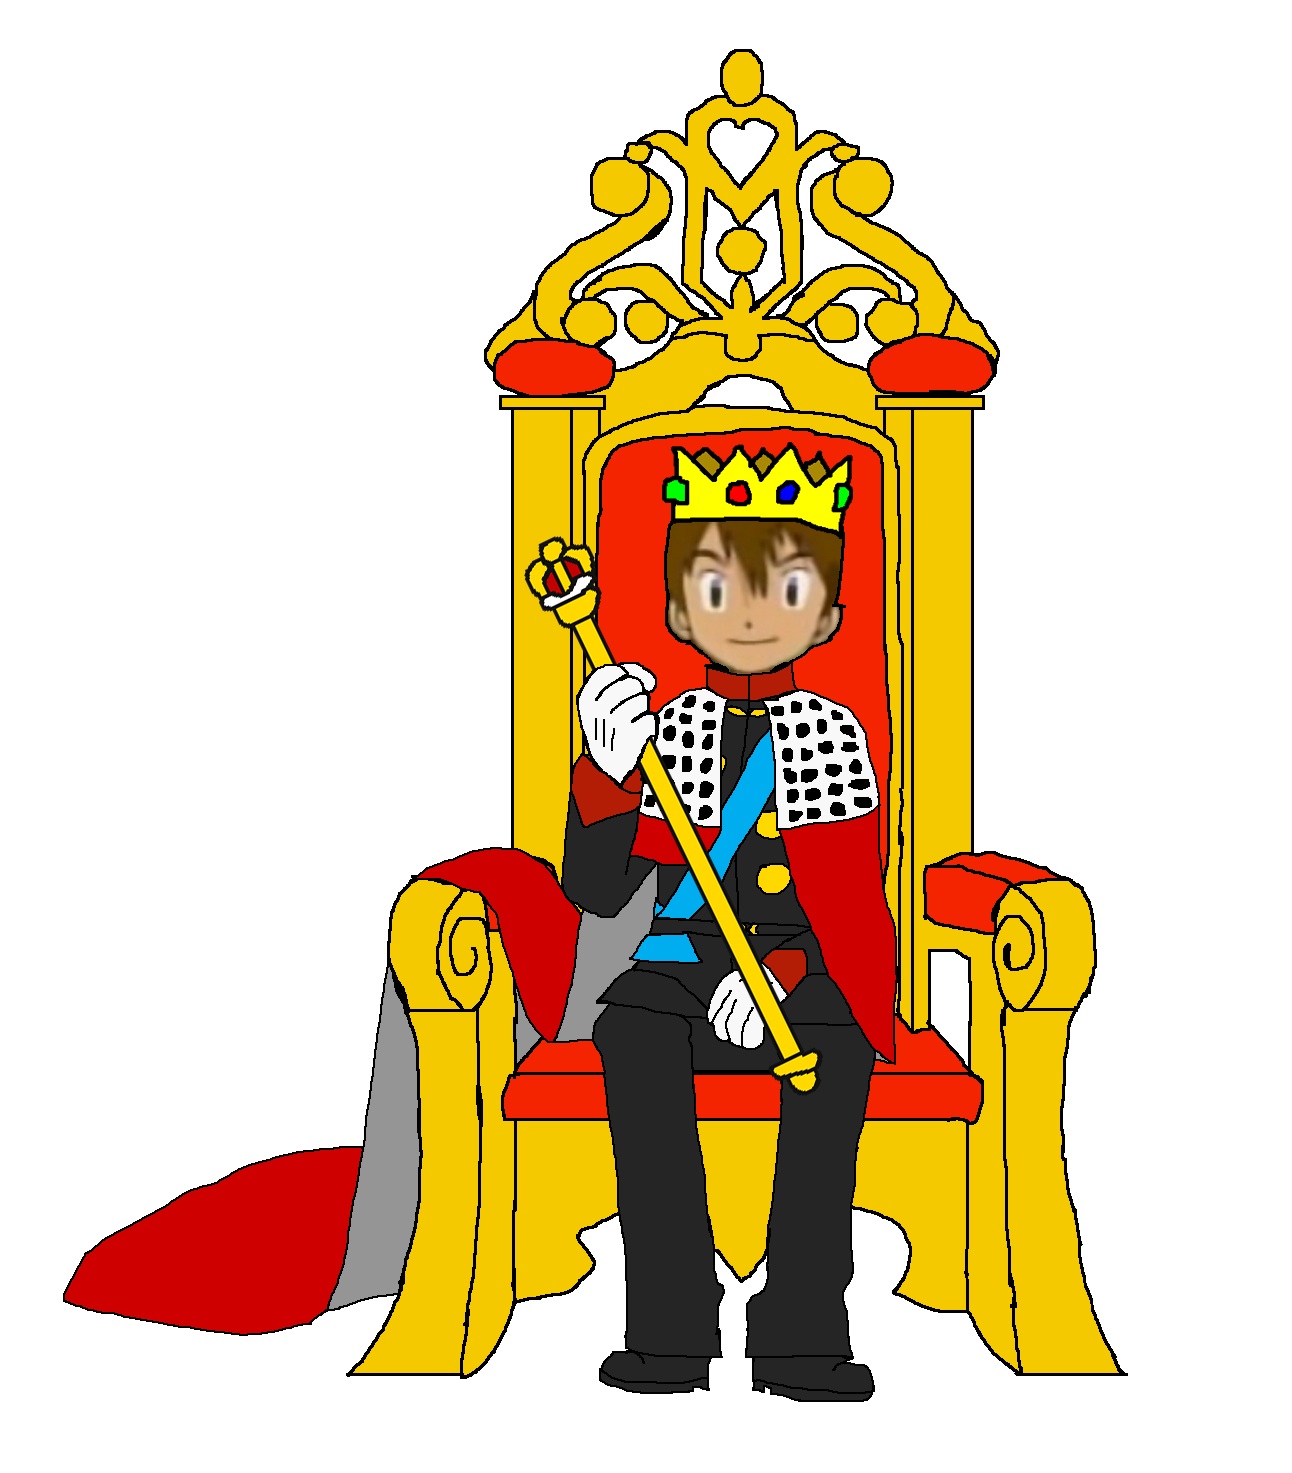 Throne Drawing - ClipArt Best